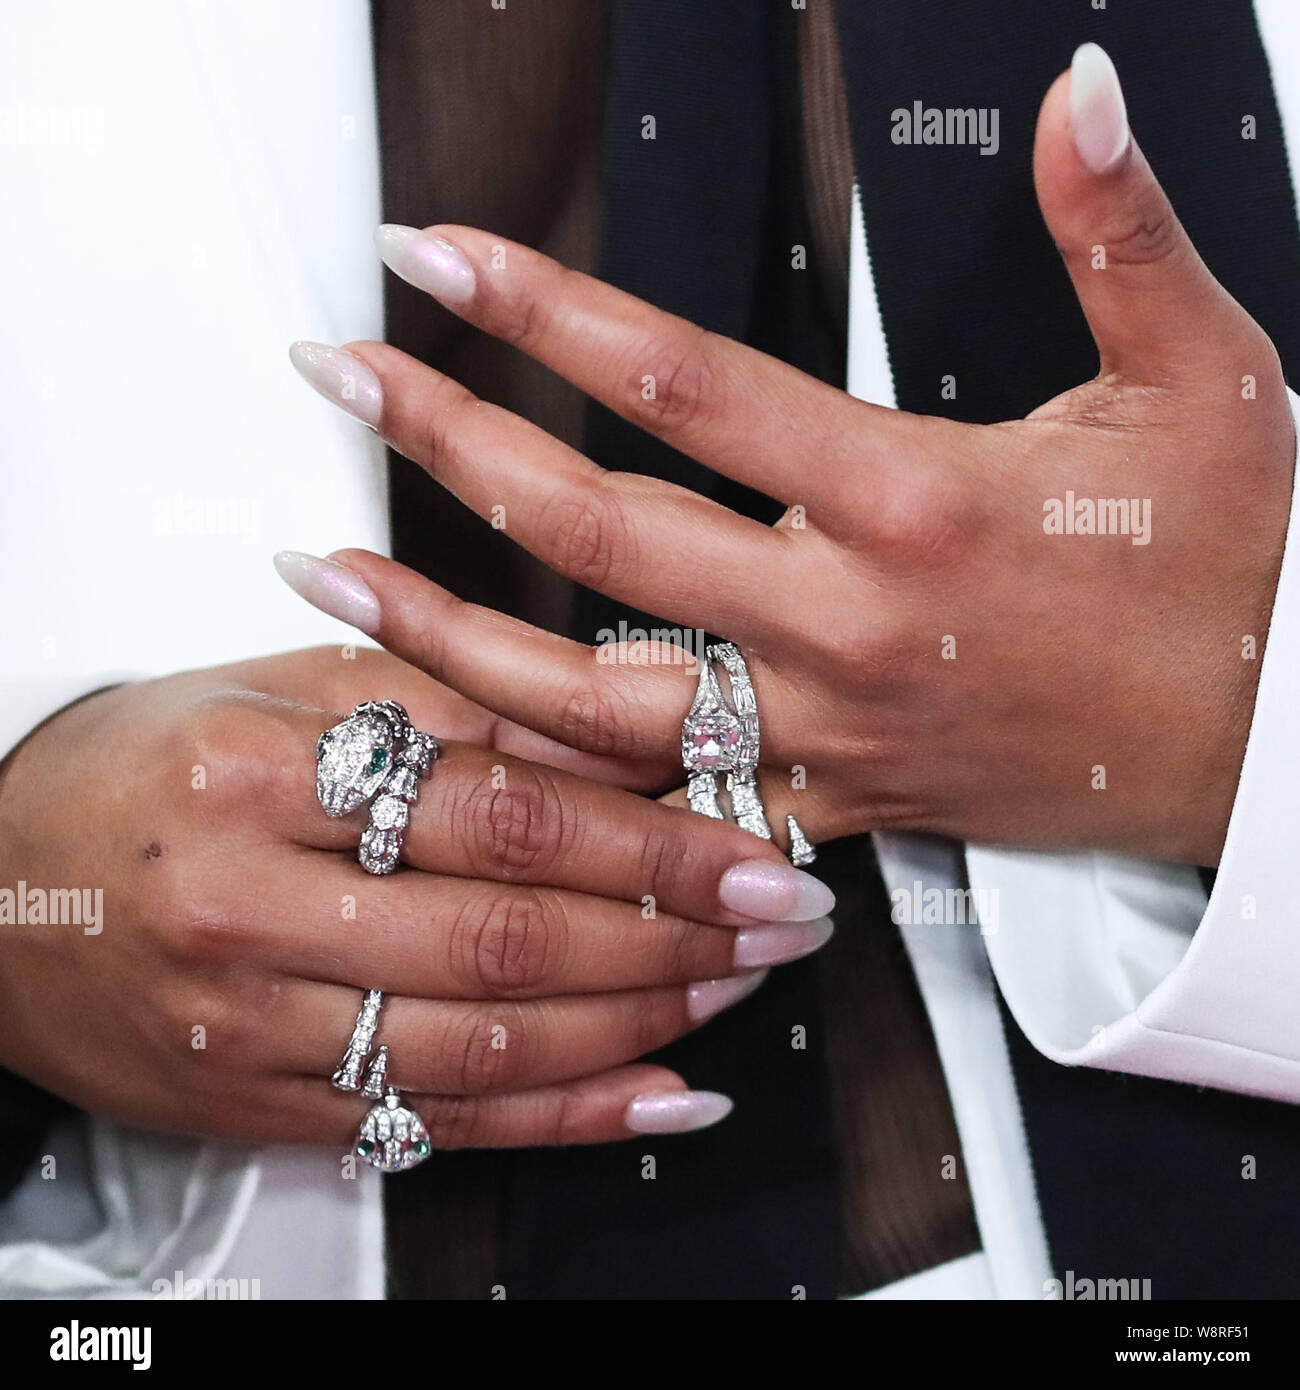 Is Priyanka Chopra showing off a sparkling engagement ring from Nick Jonas?  | whas11.com